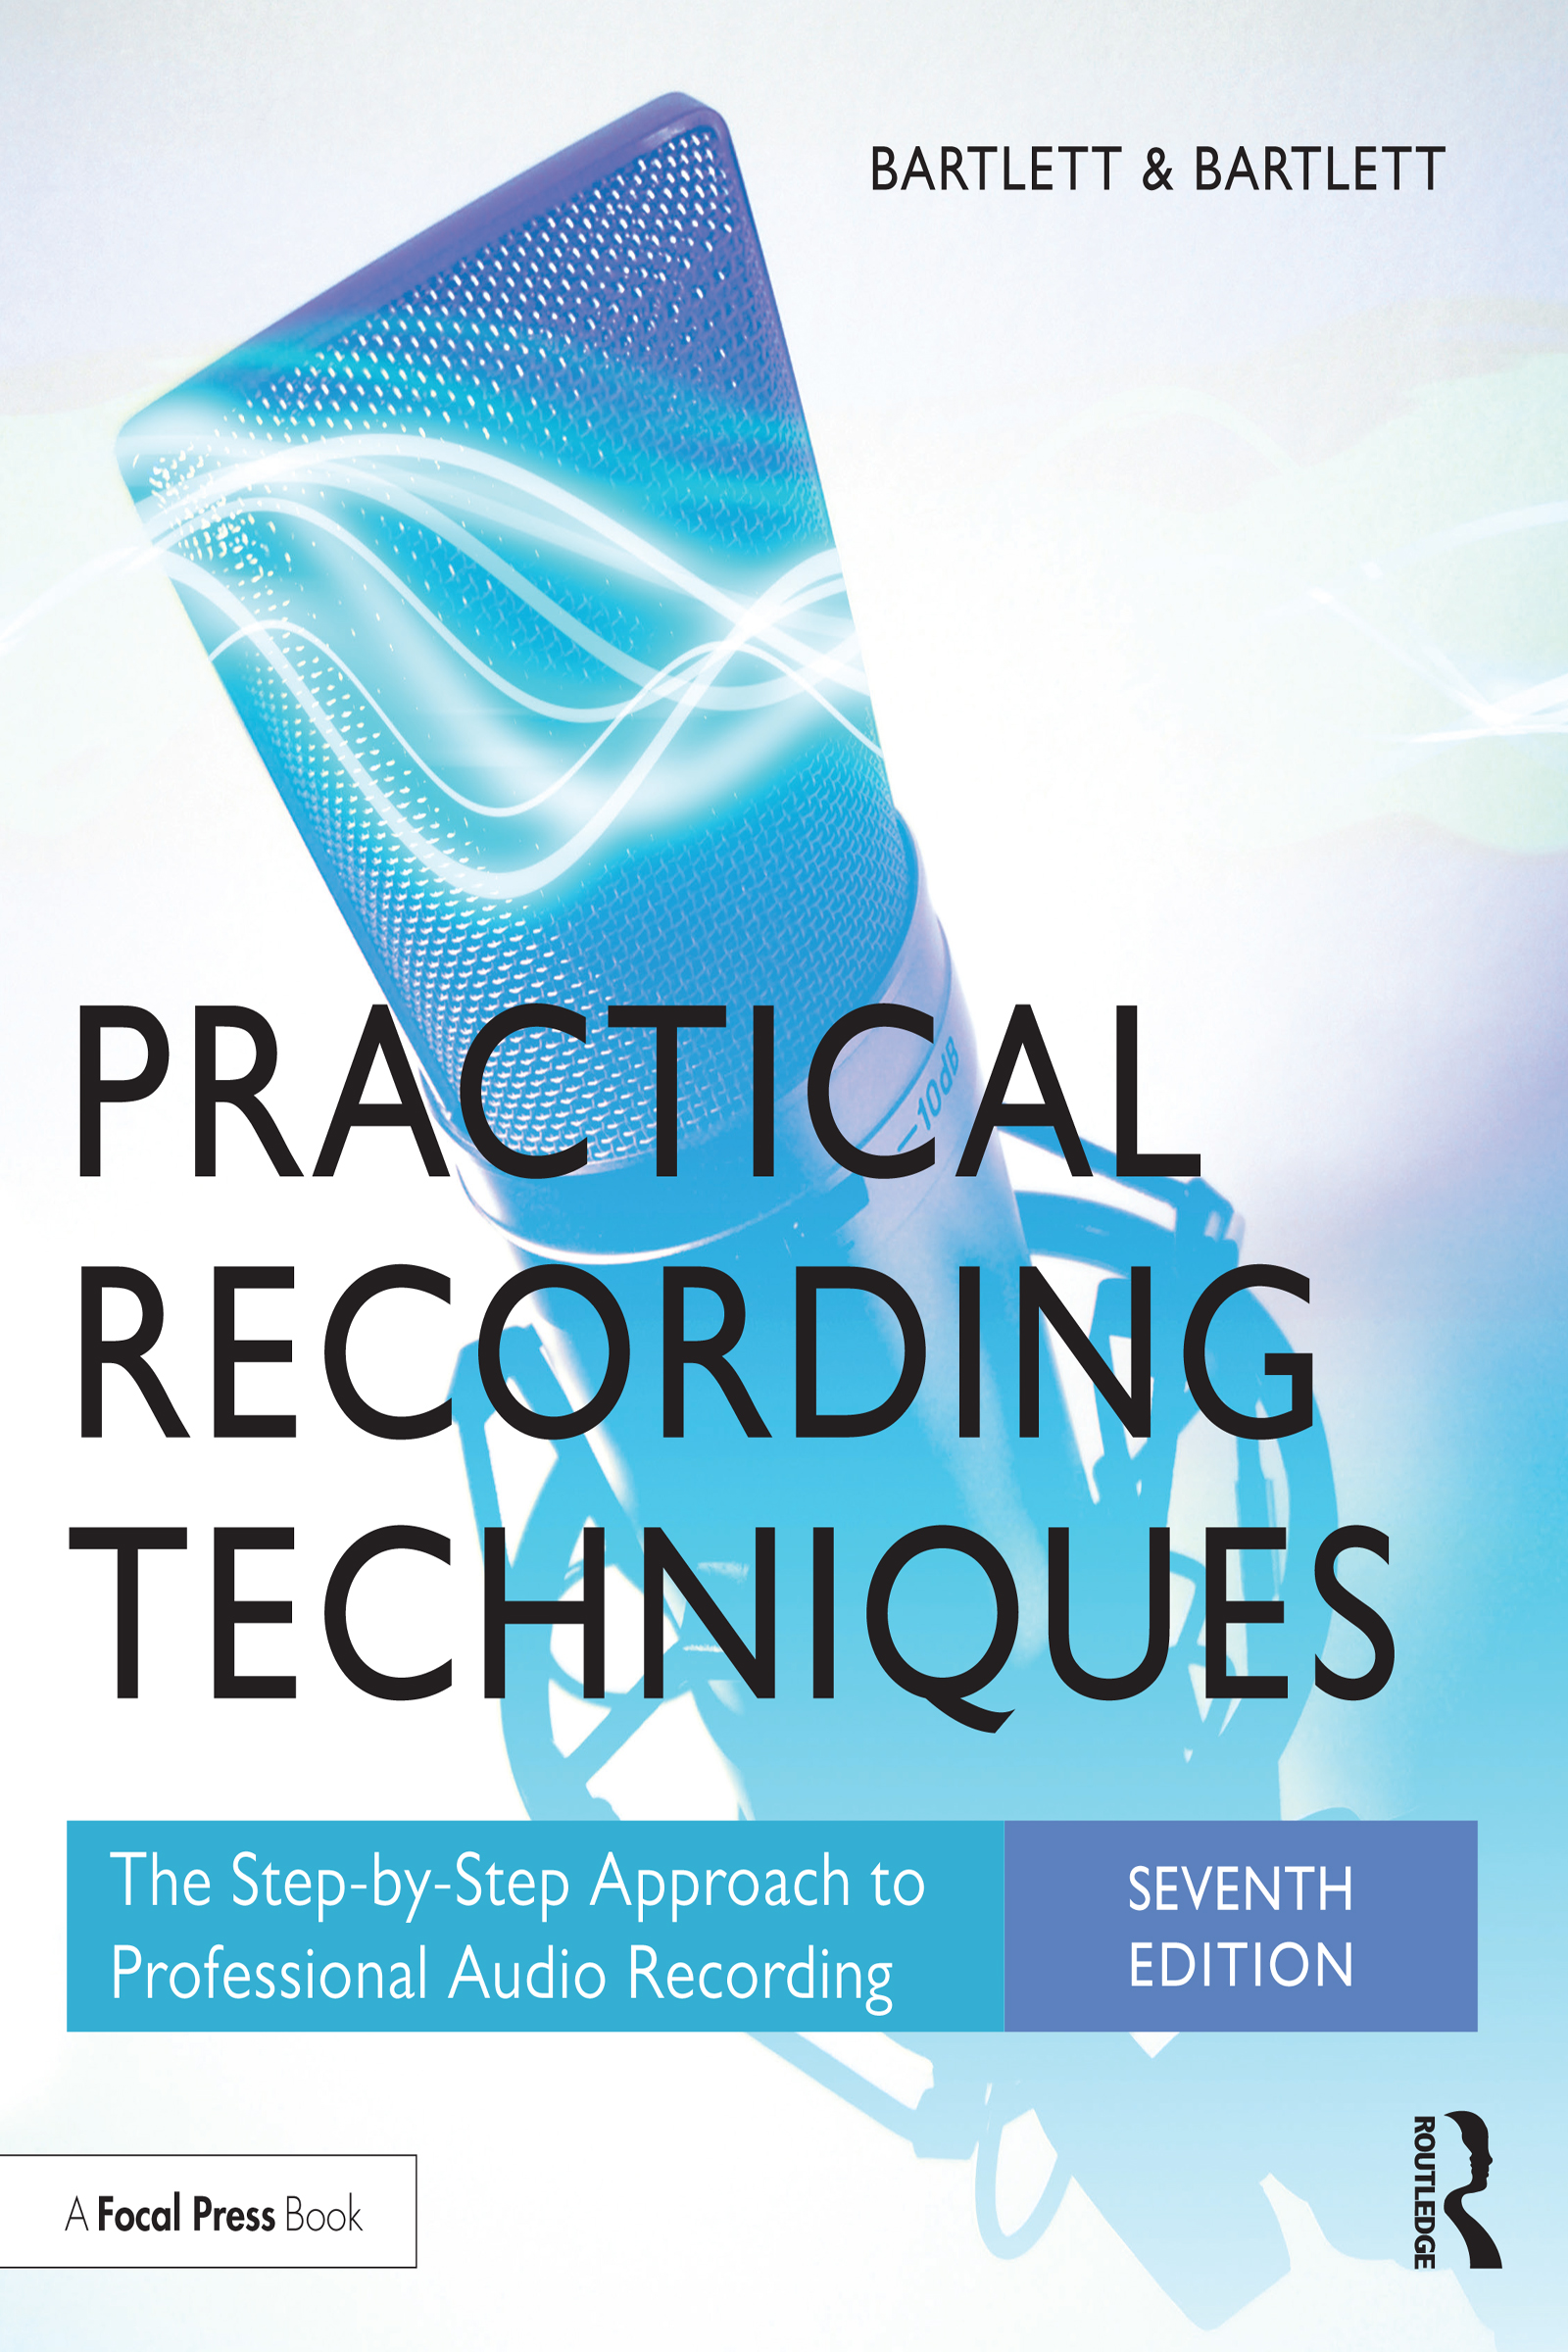 Practical recording techniques the step-by-step approach to professional audio recording